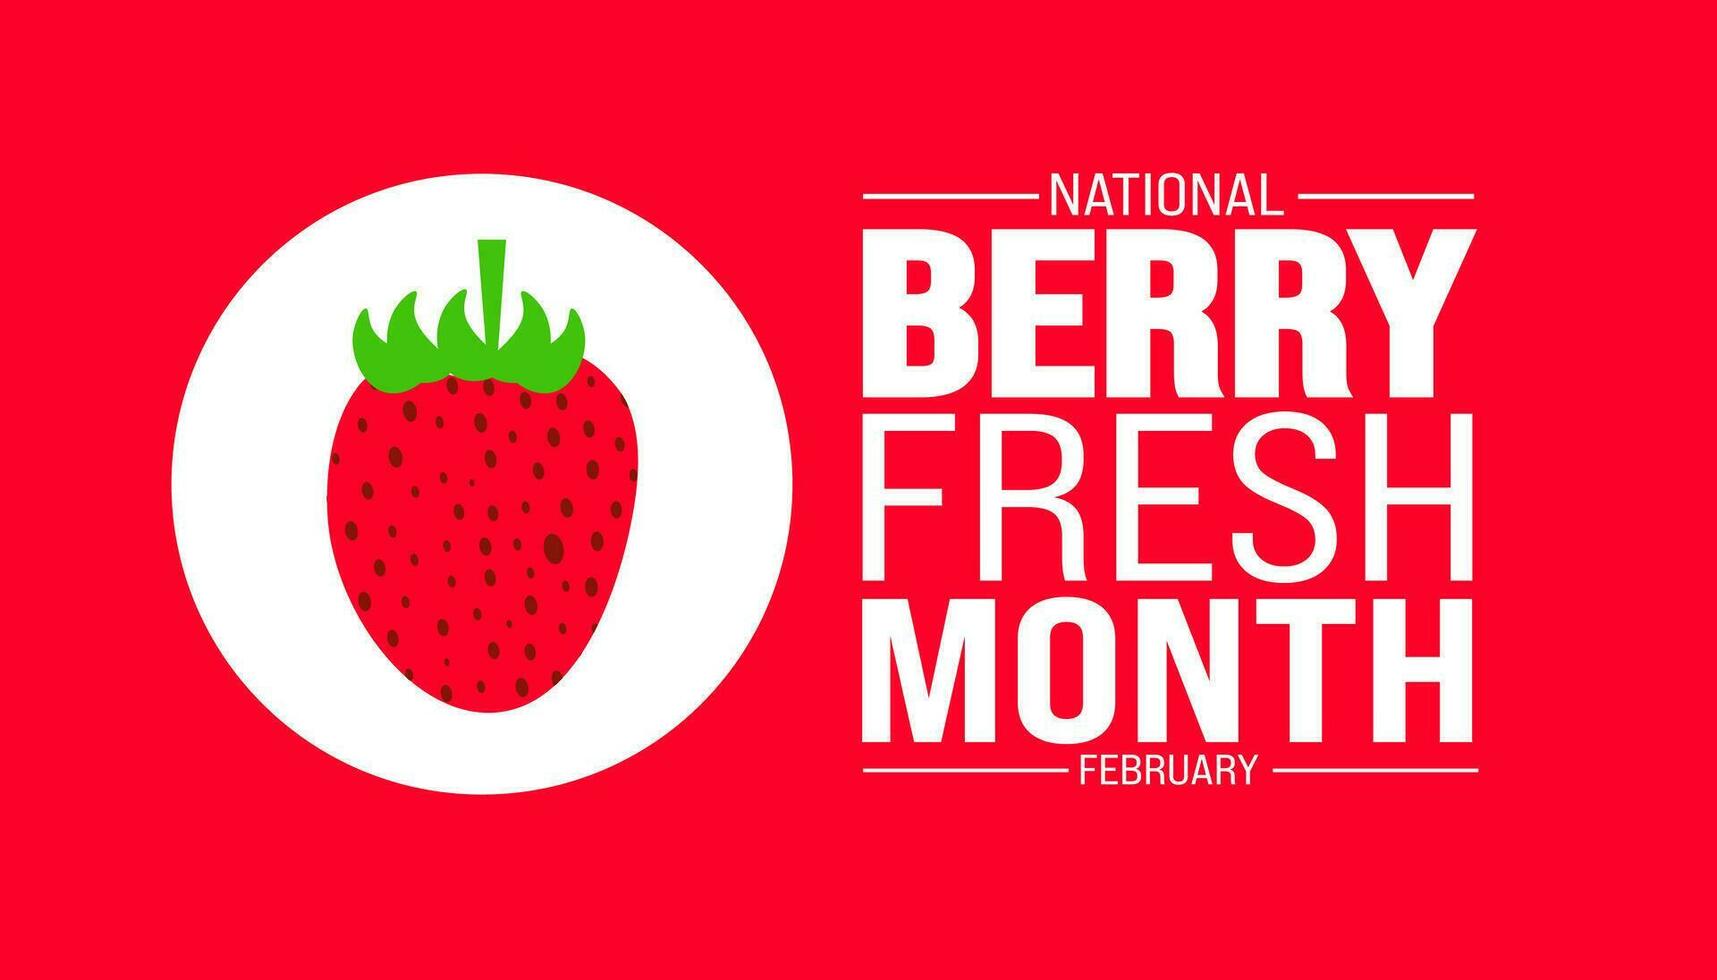 February is Berry Fresh Month background template. Holiday concept. background, banner, placard, card, and poster design template with text inscription and standard color. vector illustration.